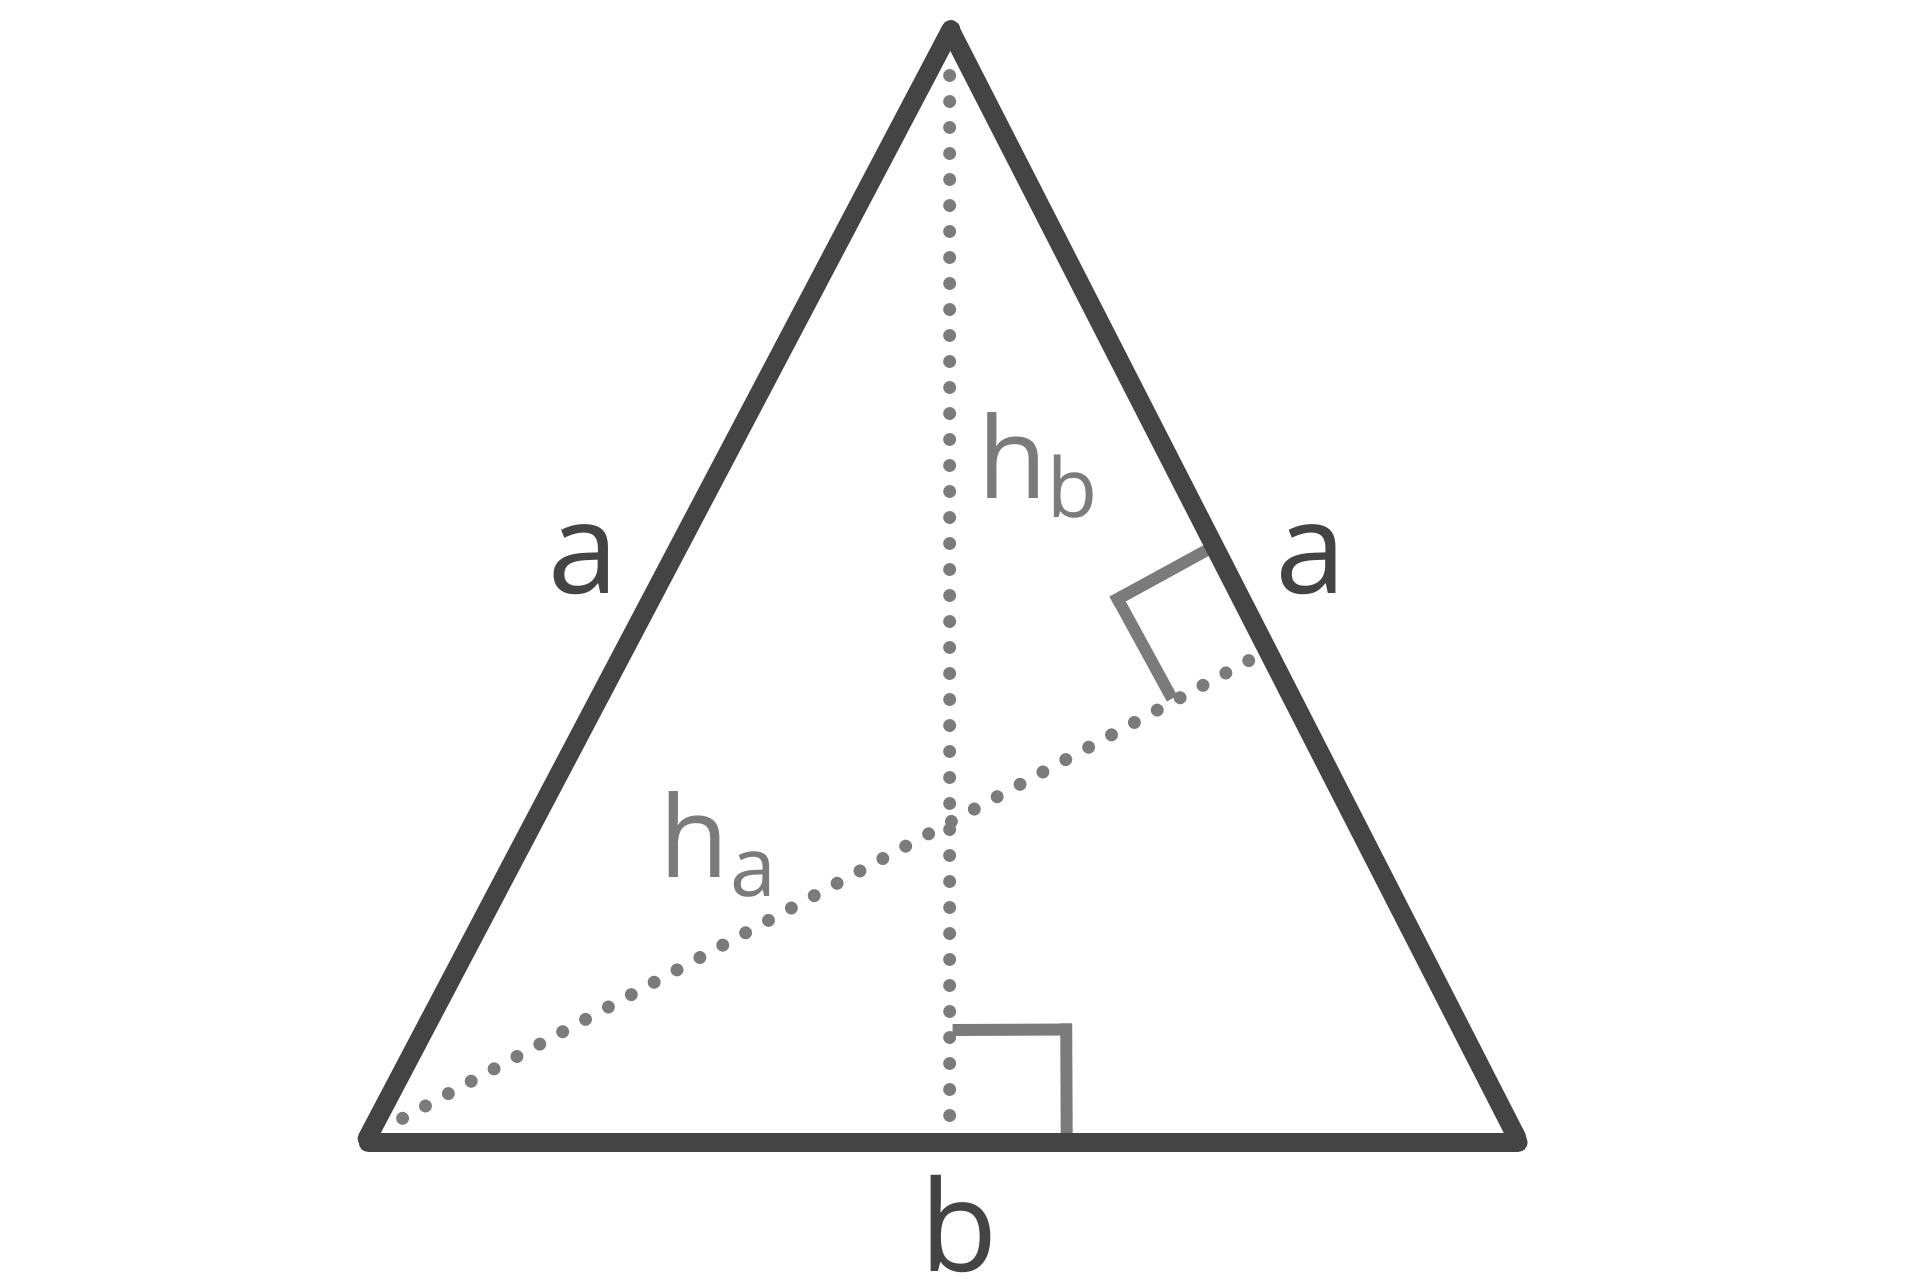 Diagram of an isosceles triangle showing the altitude of base b and side a